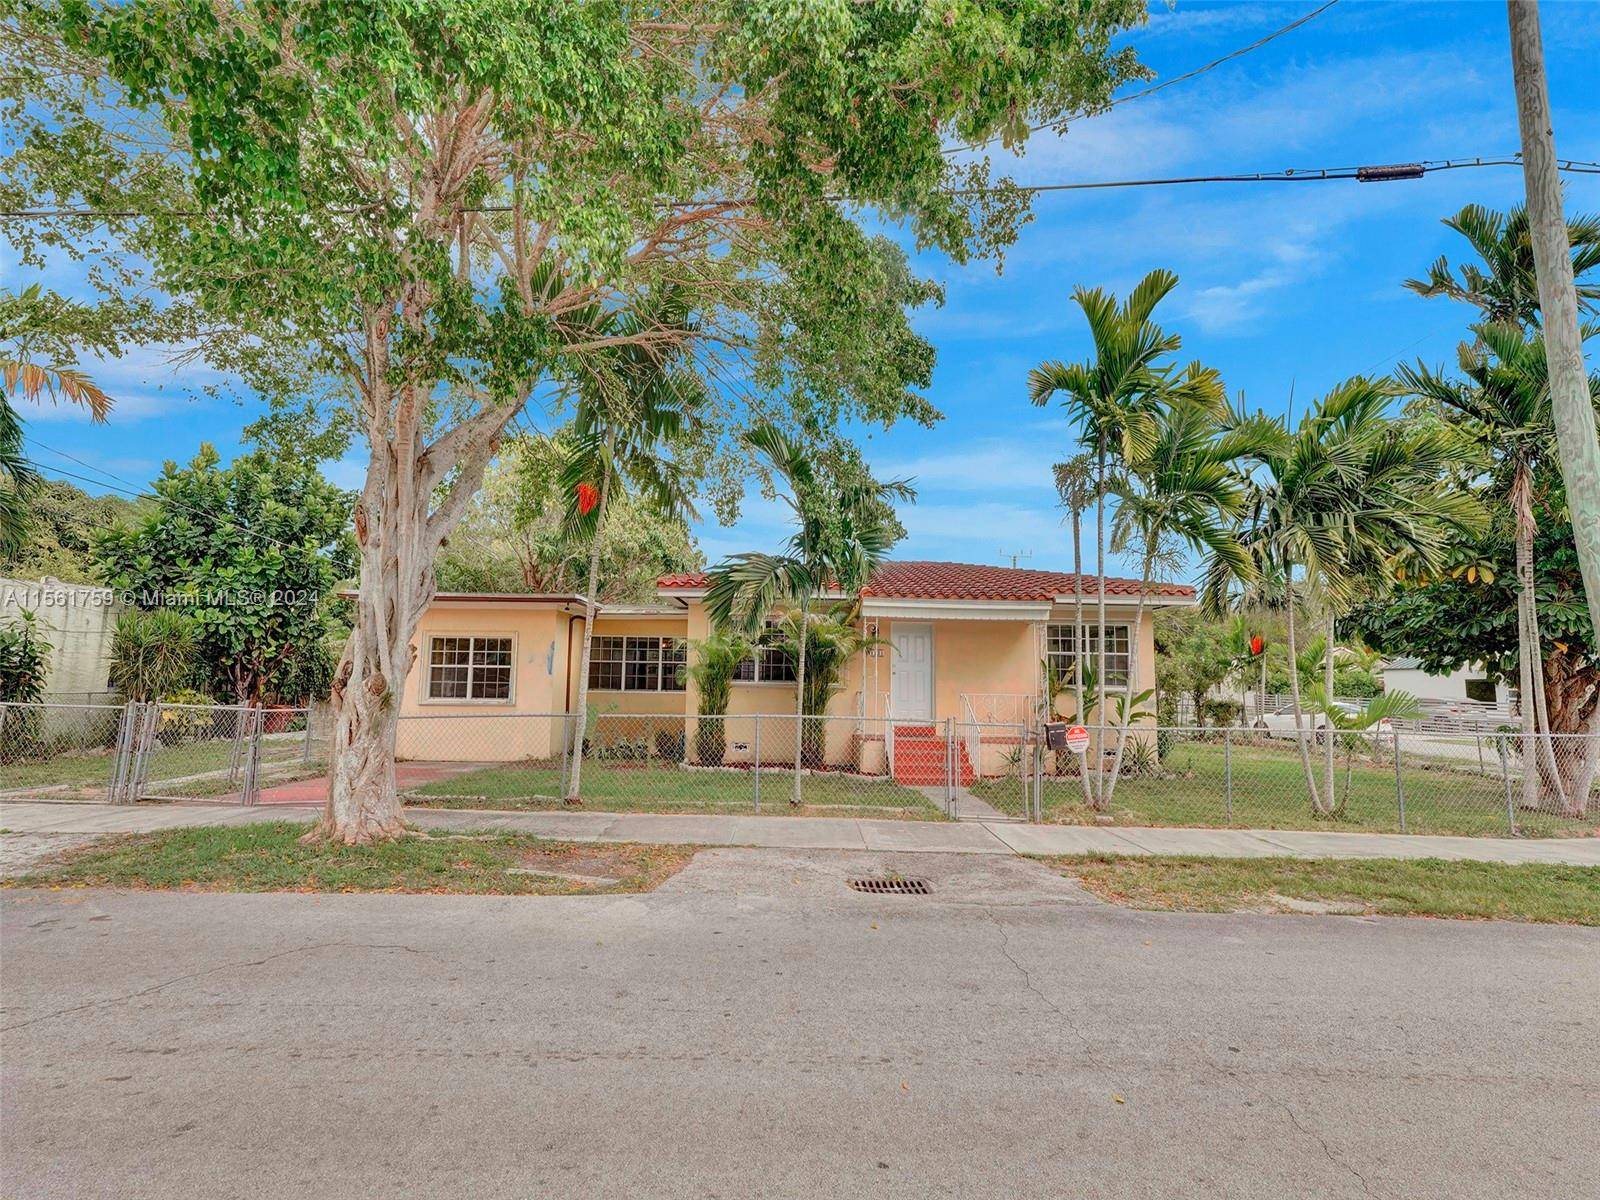 This charming 4 bed, 2 bath home presents an exciting investment opportunity in one of the most sought after areas, with endless possibilities and potential.